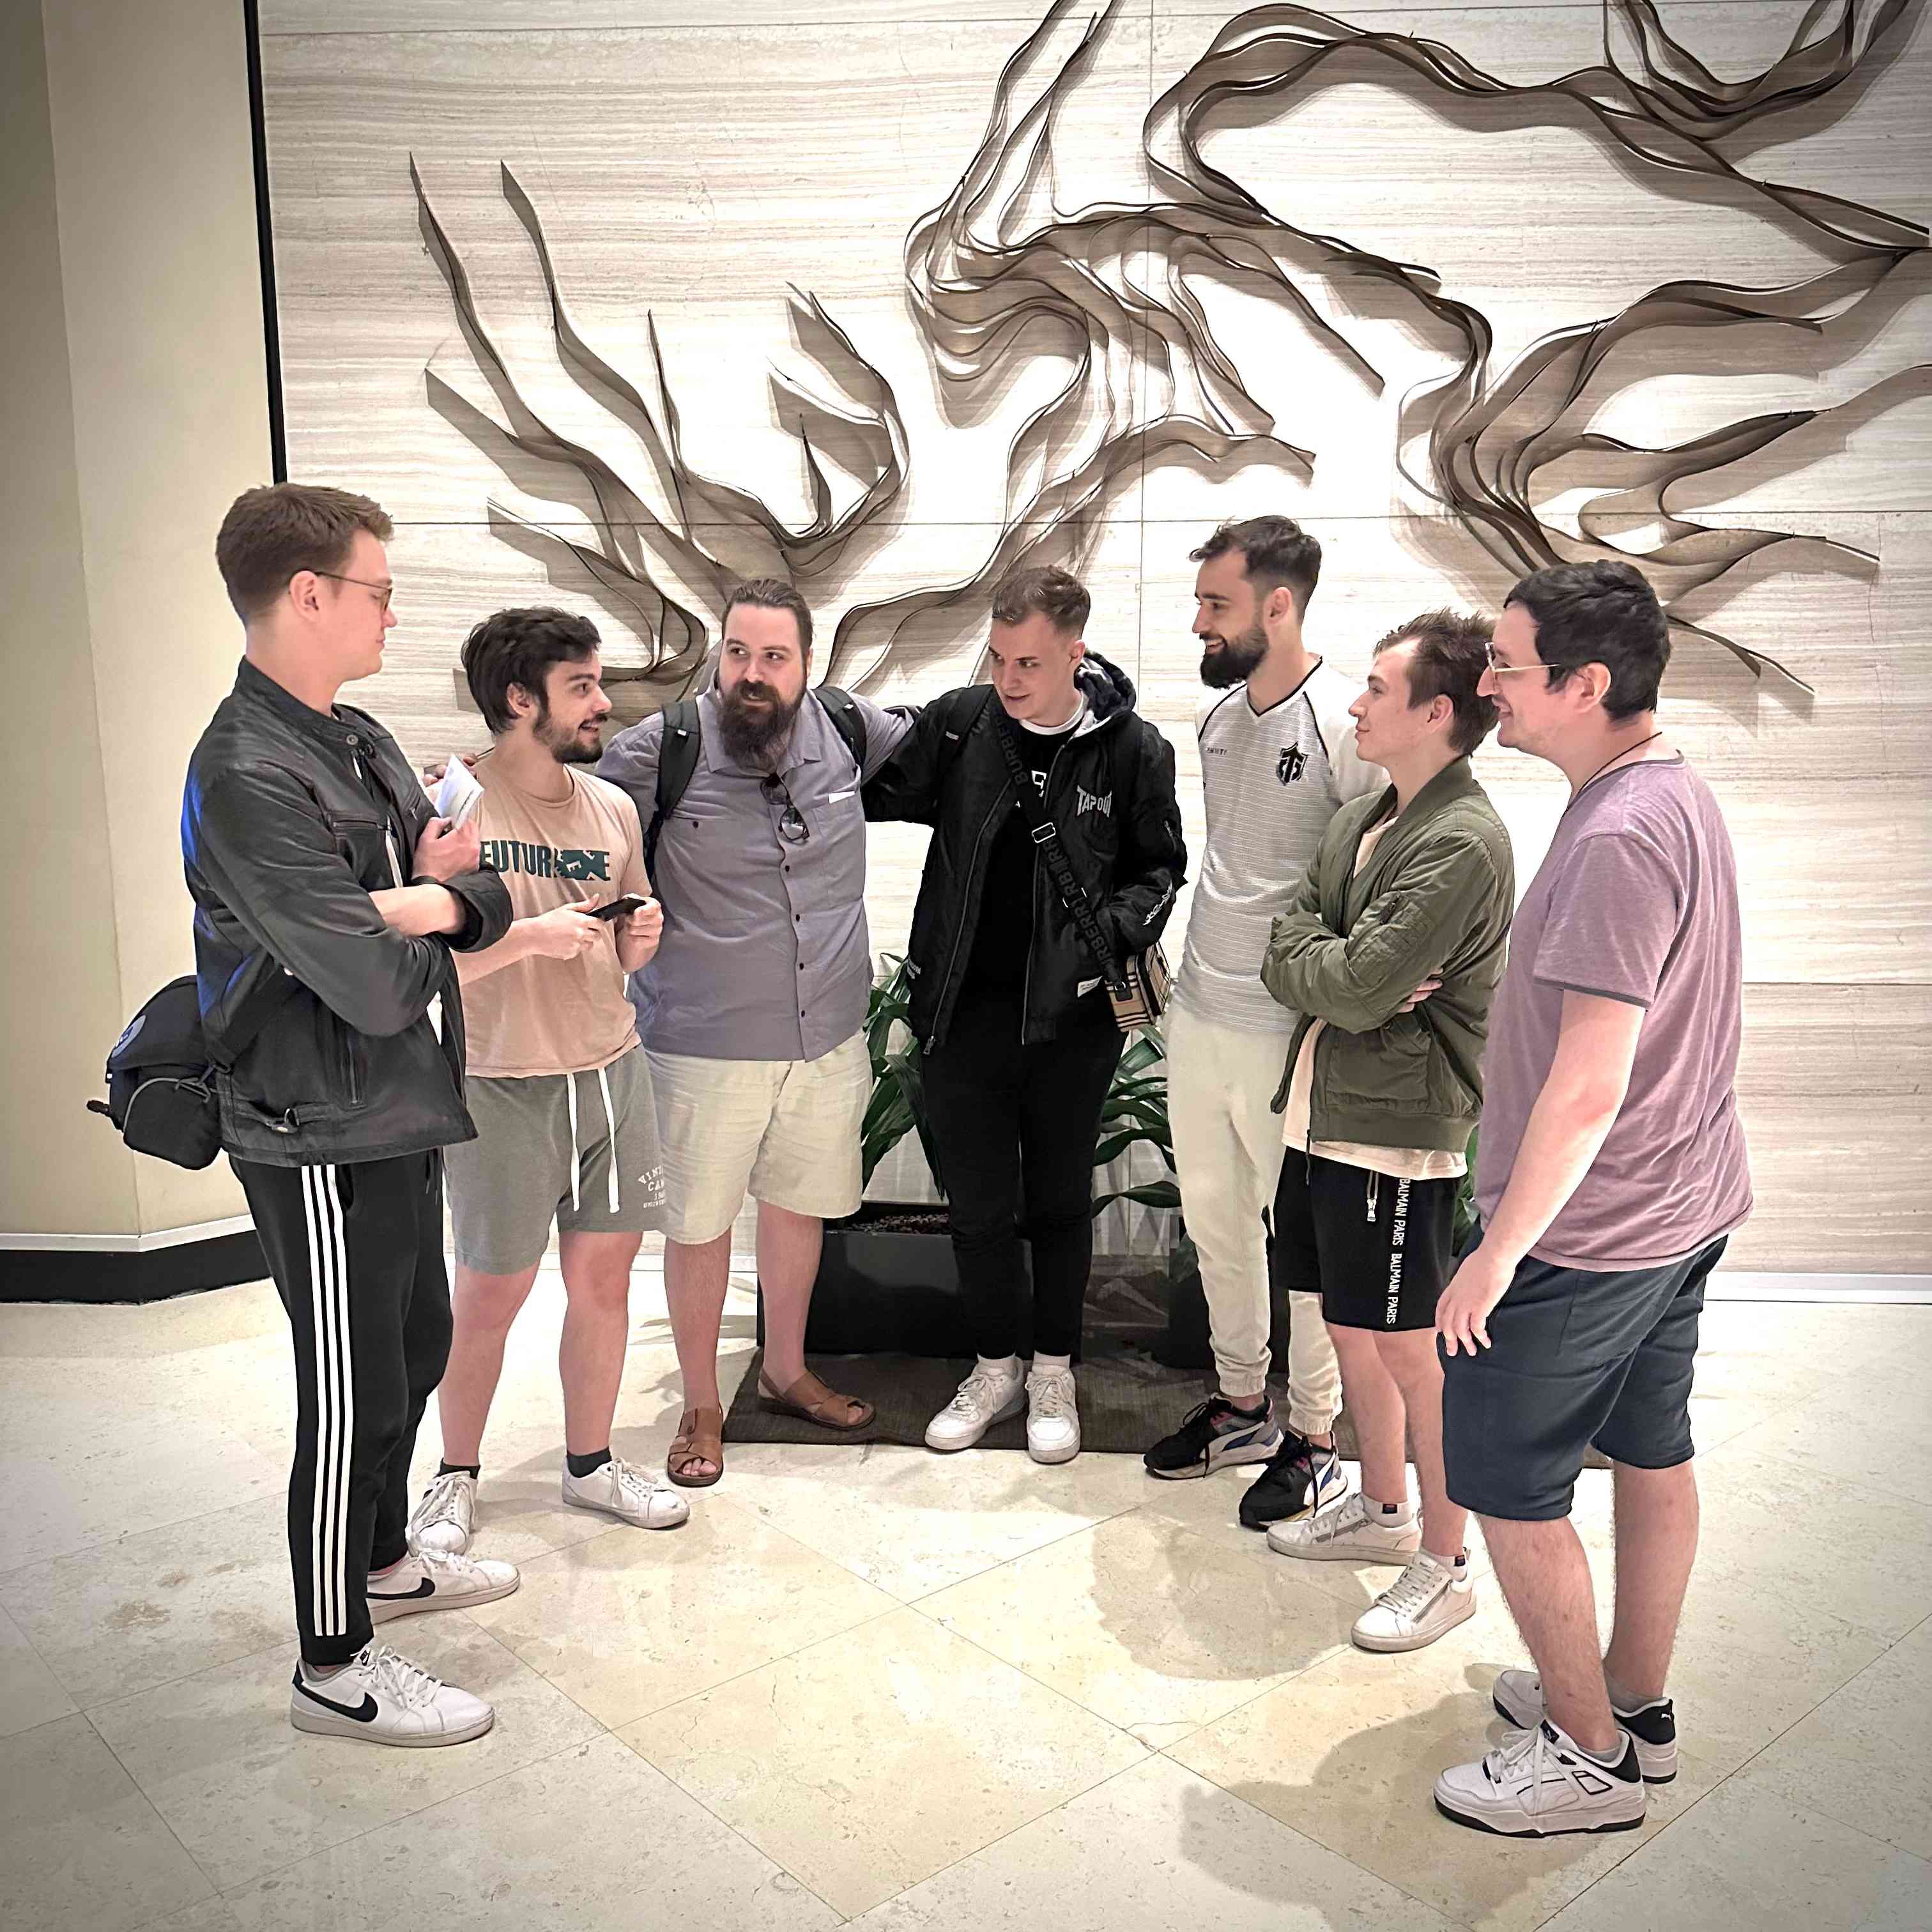 The roster for Entity huddle together to talk shop at Singapore International airport after arriving for TI 11